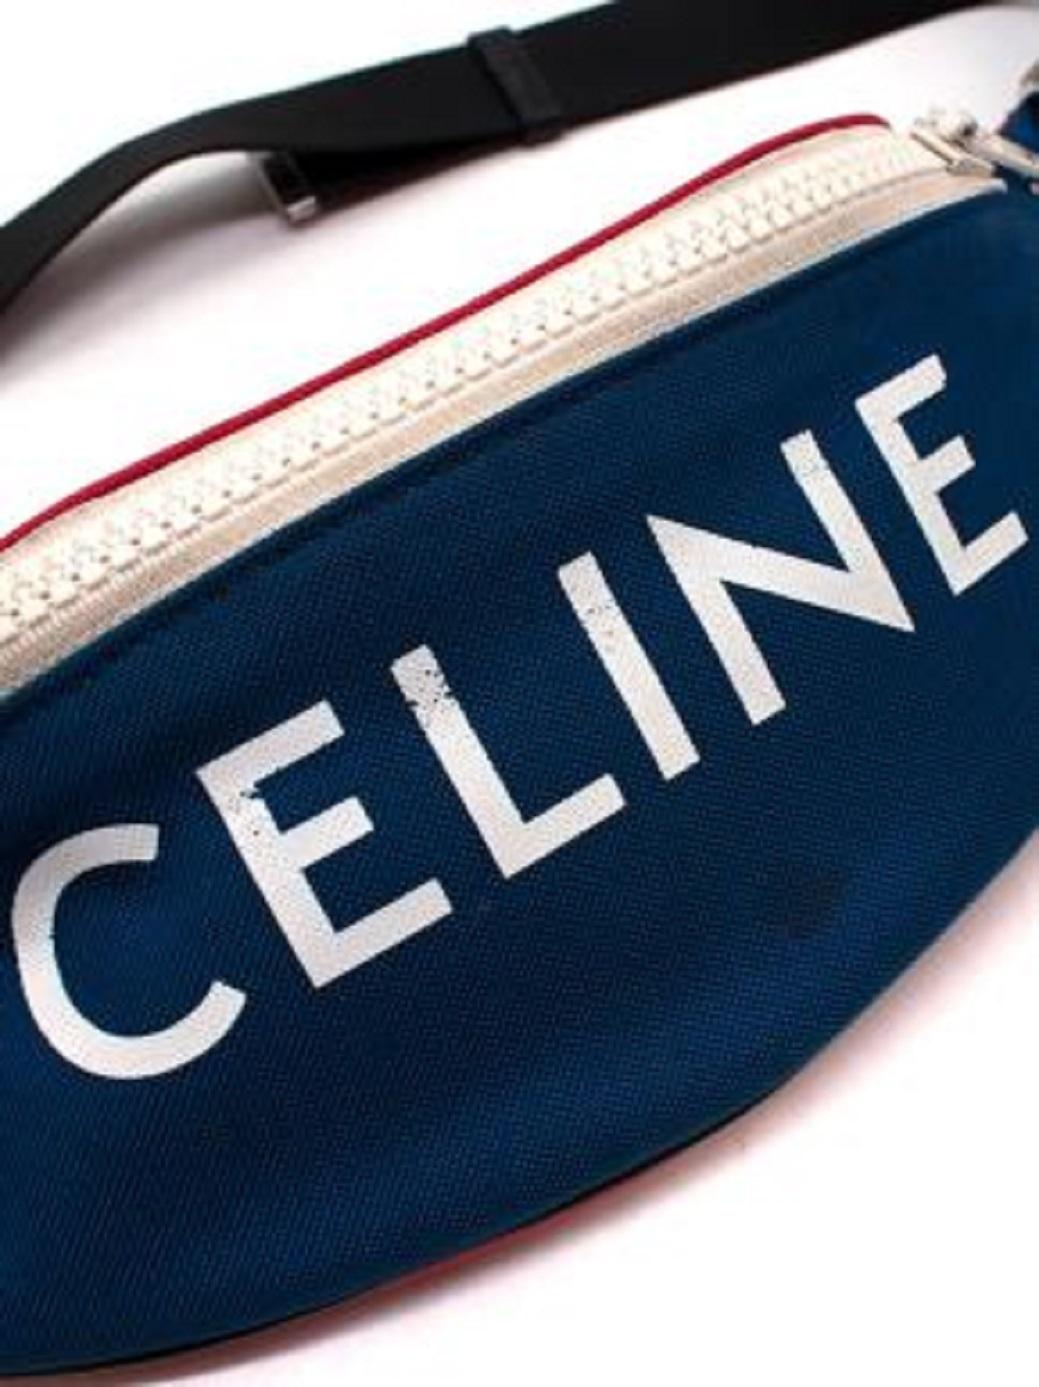 Celine XL Nylon Logo Canvas Belt Bag

- Adjustable and multi-wearable strap
- Zipped compartment
- White zipper
- One main compartment with one slip pocket
- Logo print on canvas
- Chain detailing on zipper

Material
Canvas

Made in France

9.5/10